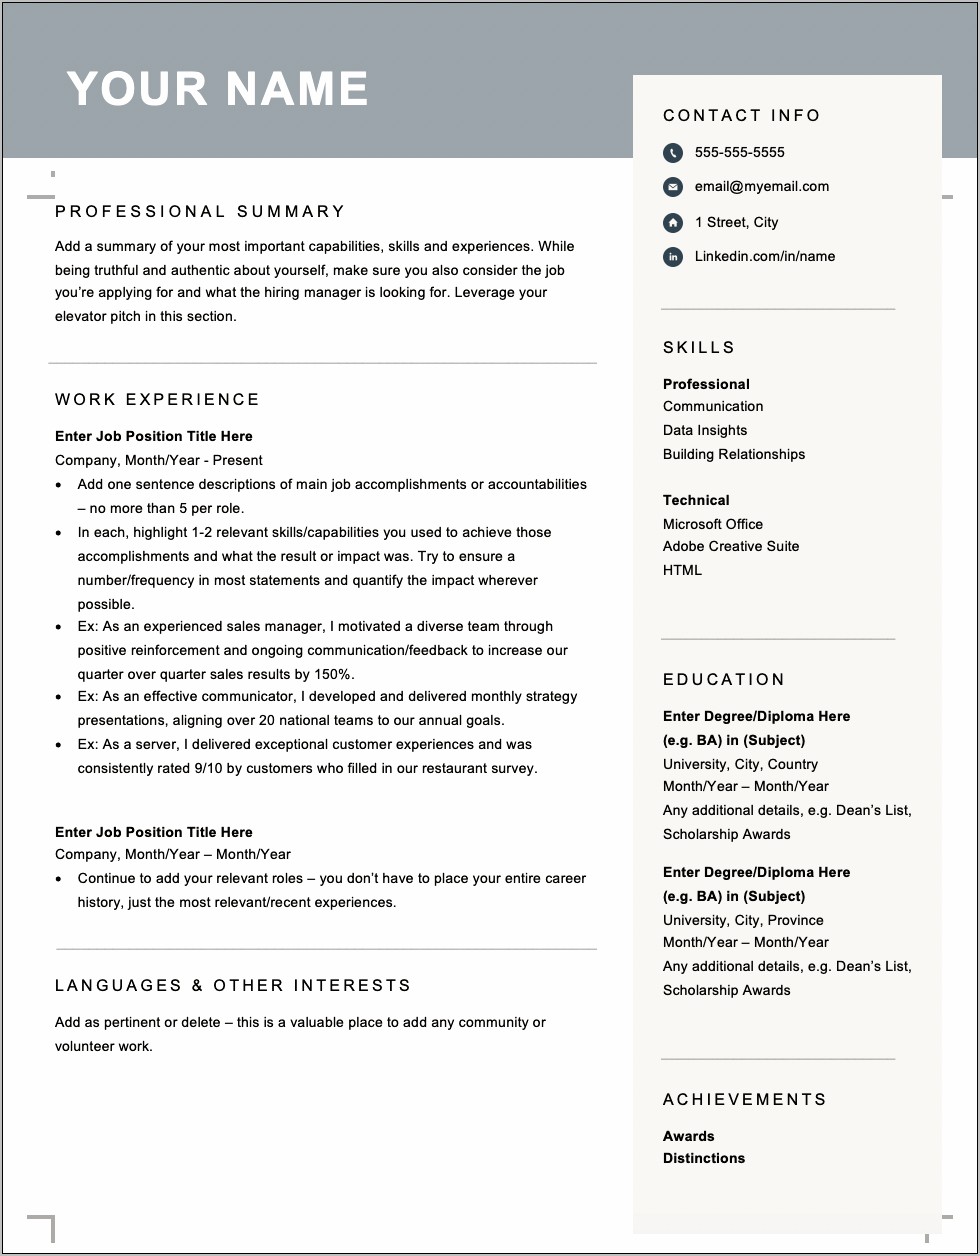 Sample Resume For Banking Job In Canada